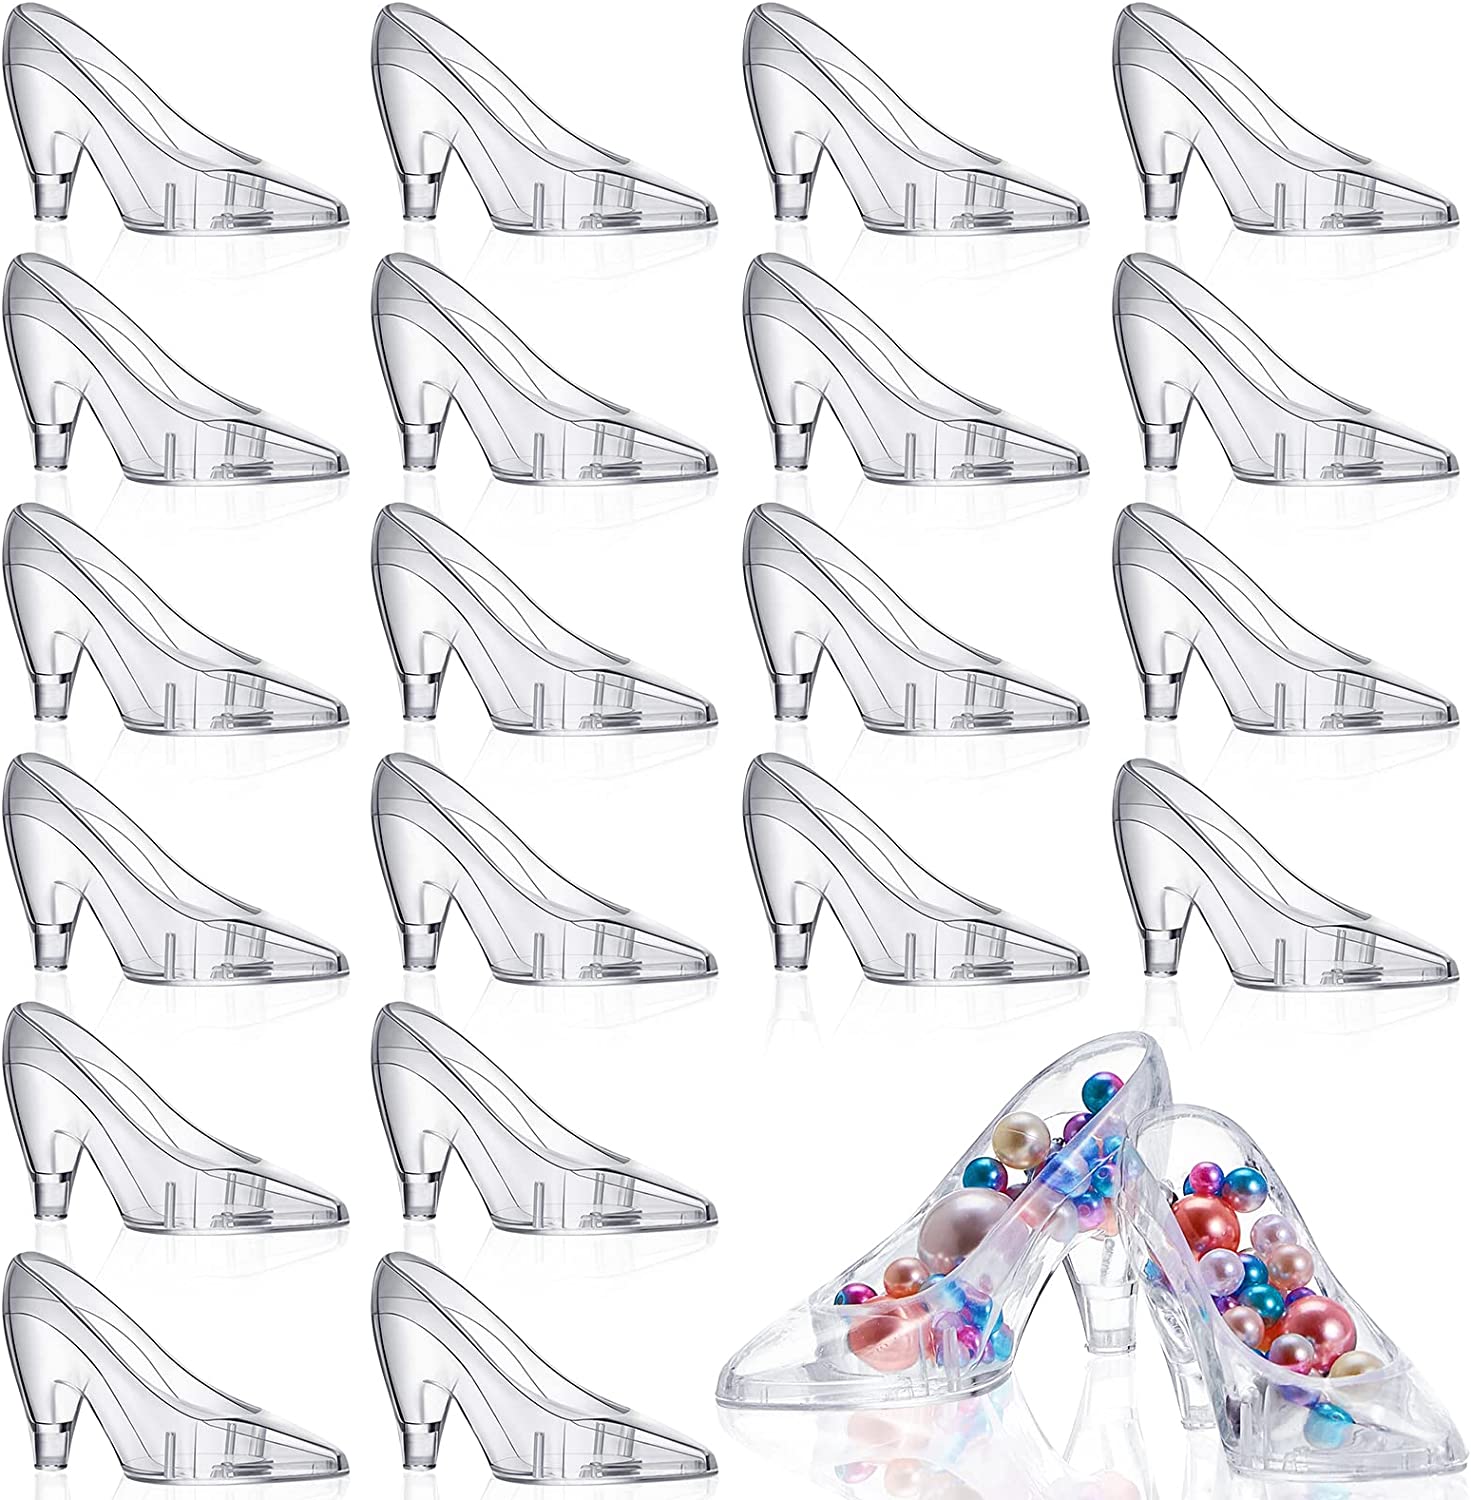  Super Z Outlet Plastic Mini Cinderella Princess Inspired Slipper  High Heel Shoe Party Decoration for Weddings, Birthday Party, Table  Serving, Candy & Other Event Favors (8 Pieces) : Home & Kitchen